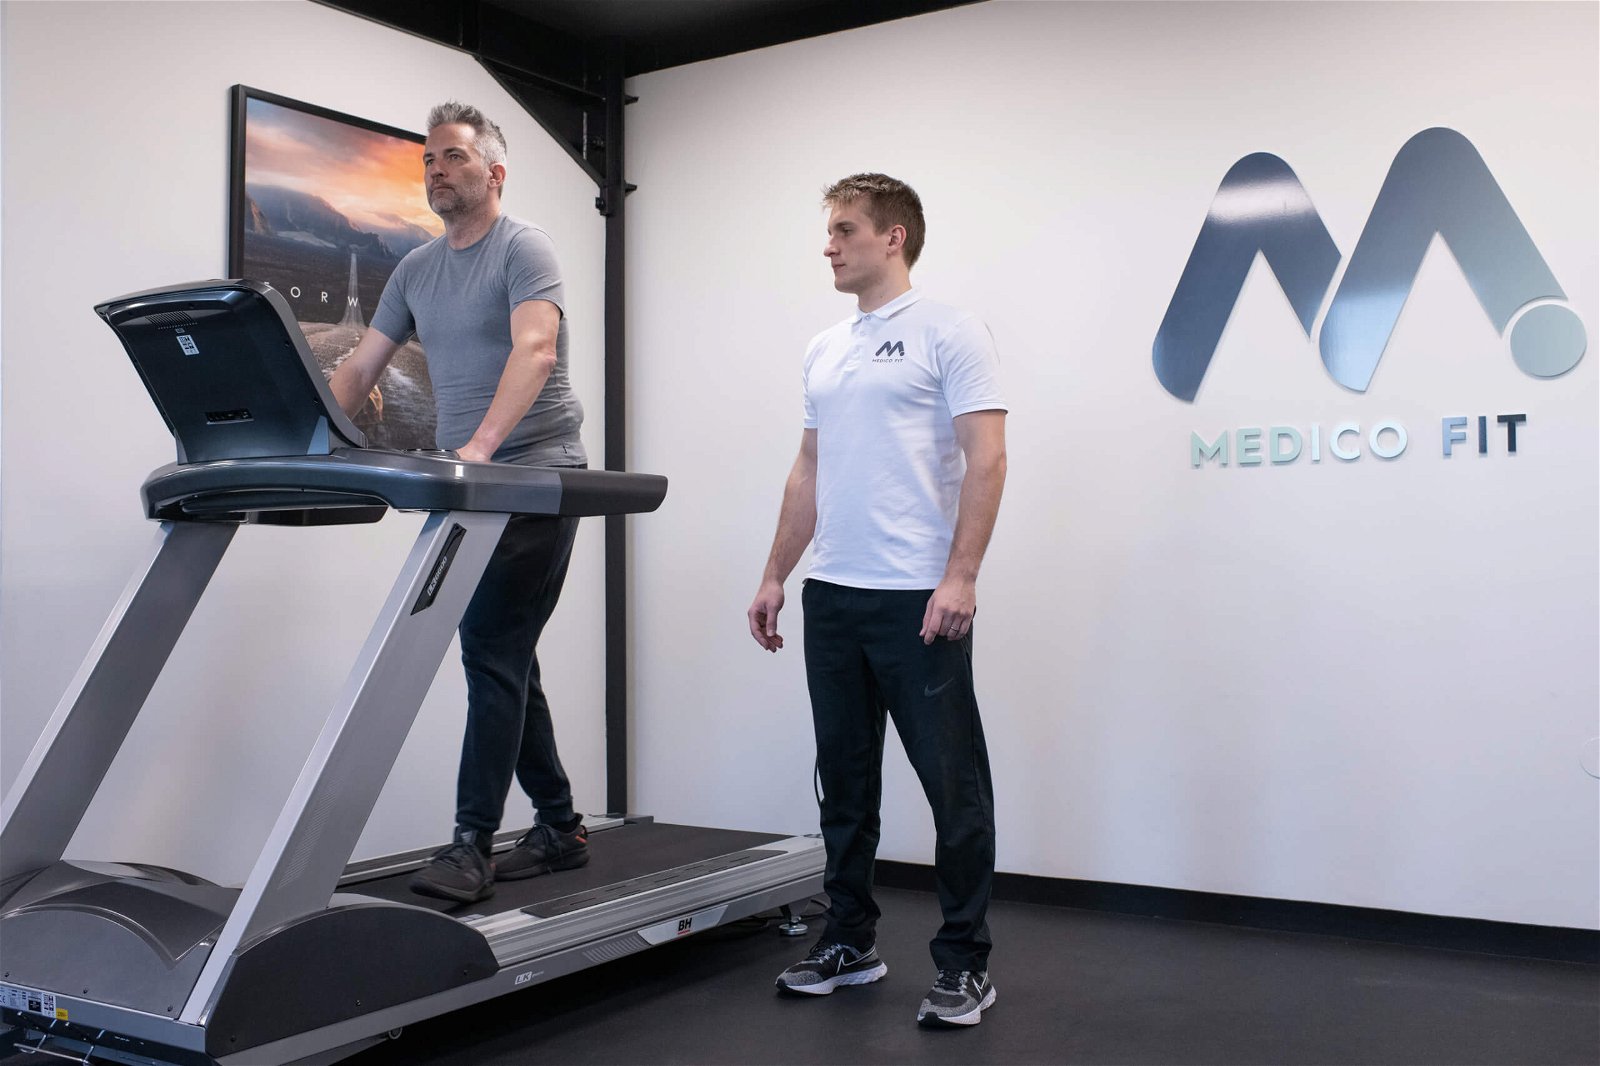 Personal training at Medicofit Clinic for our partners’ employees